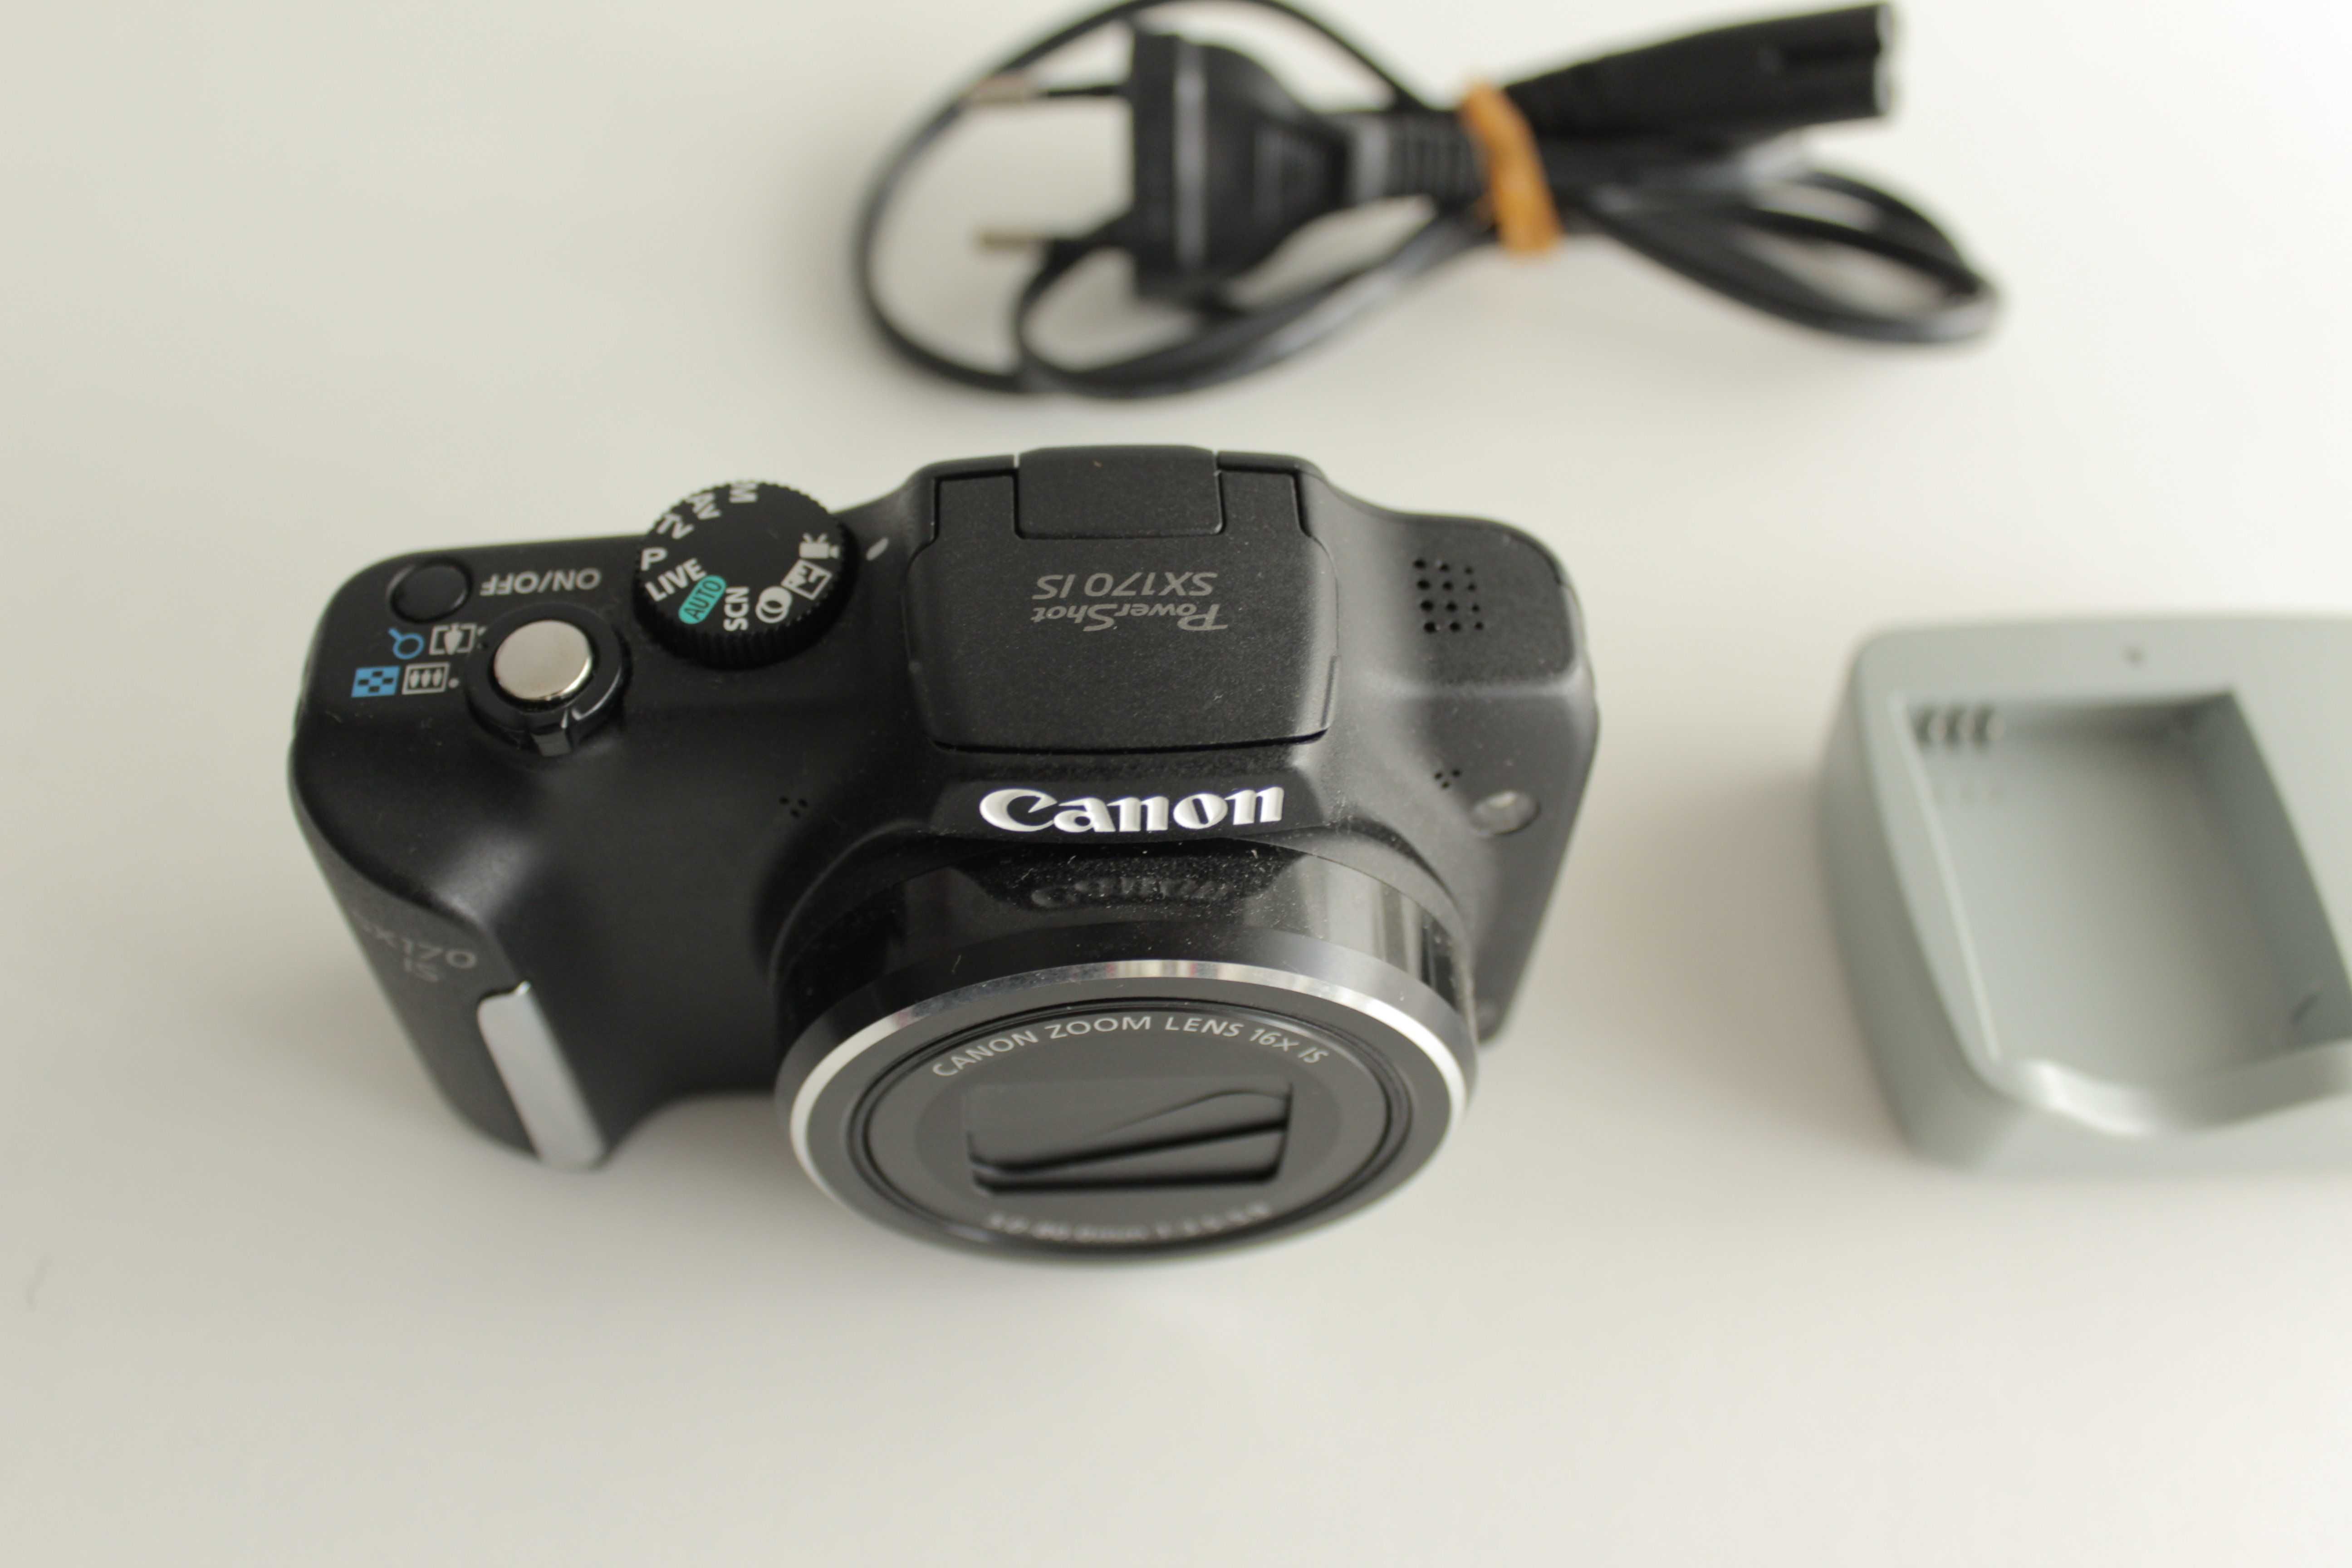 Canon PowerShot SX170 IS 16Mpx